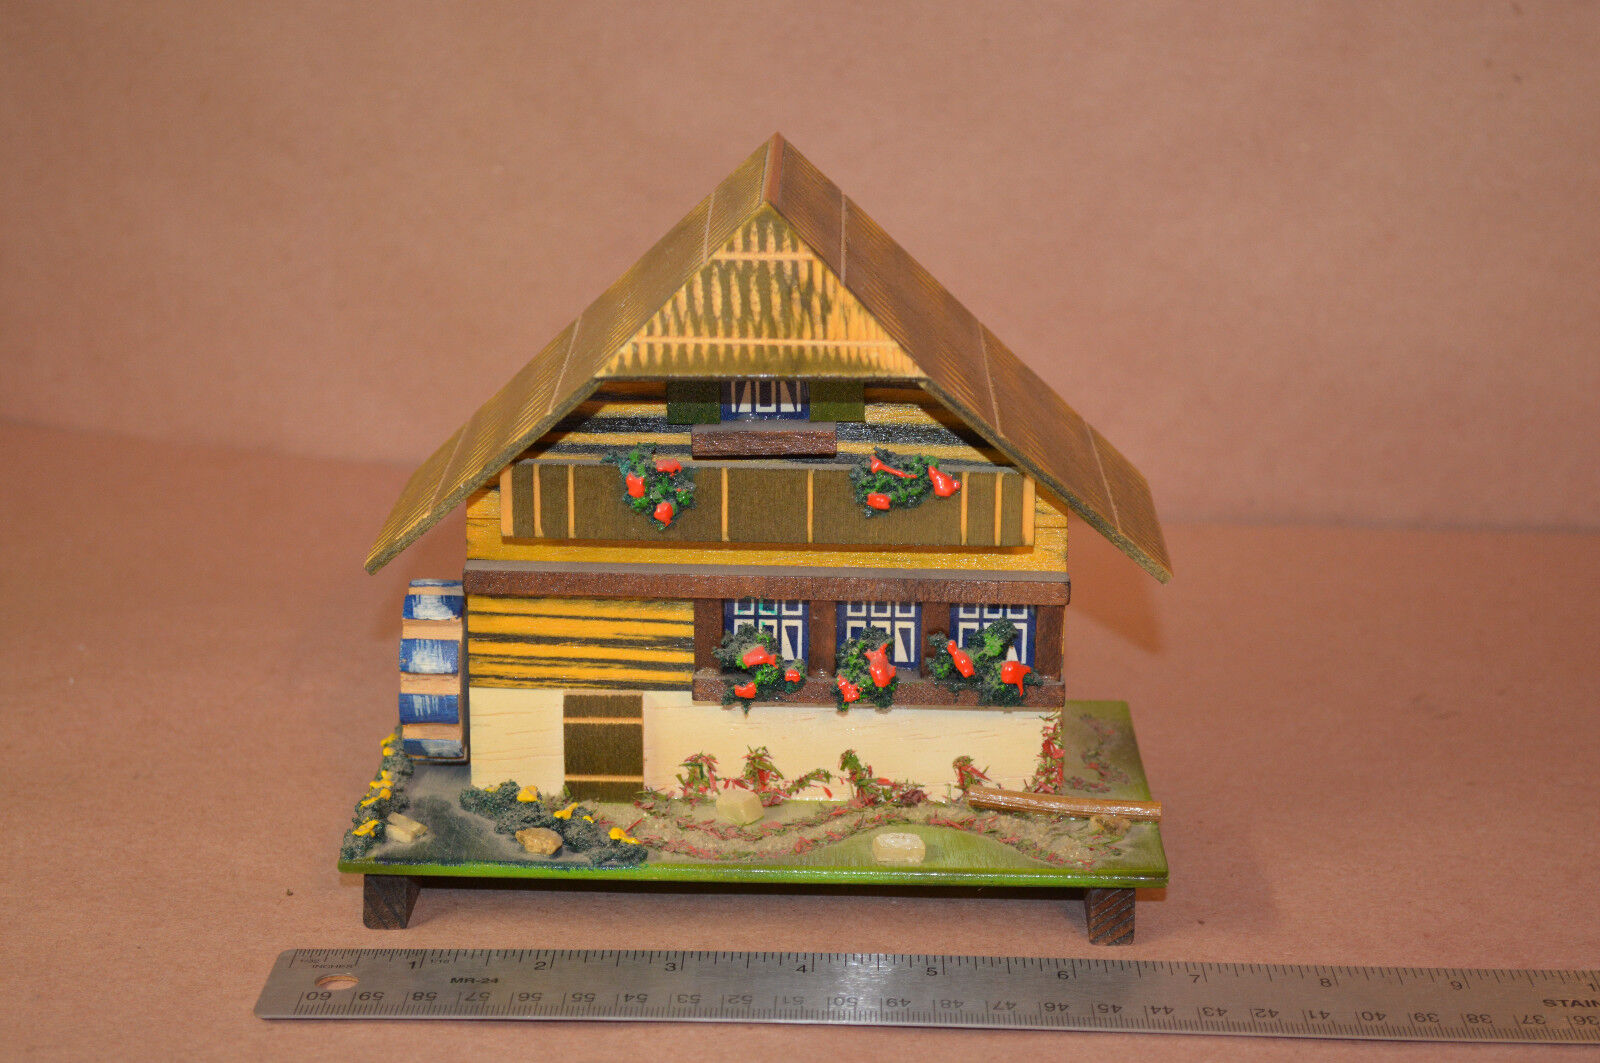  VTG House Music/Jewelry Box Plays Dr. Schiwago Water Wheel #1478